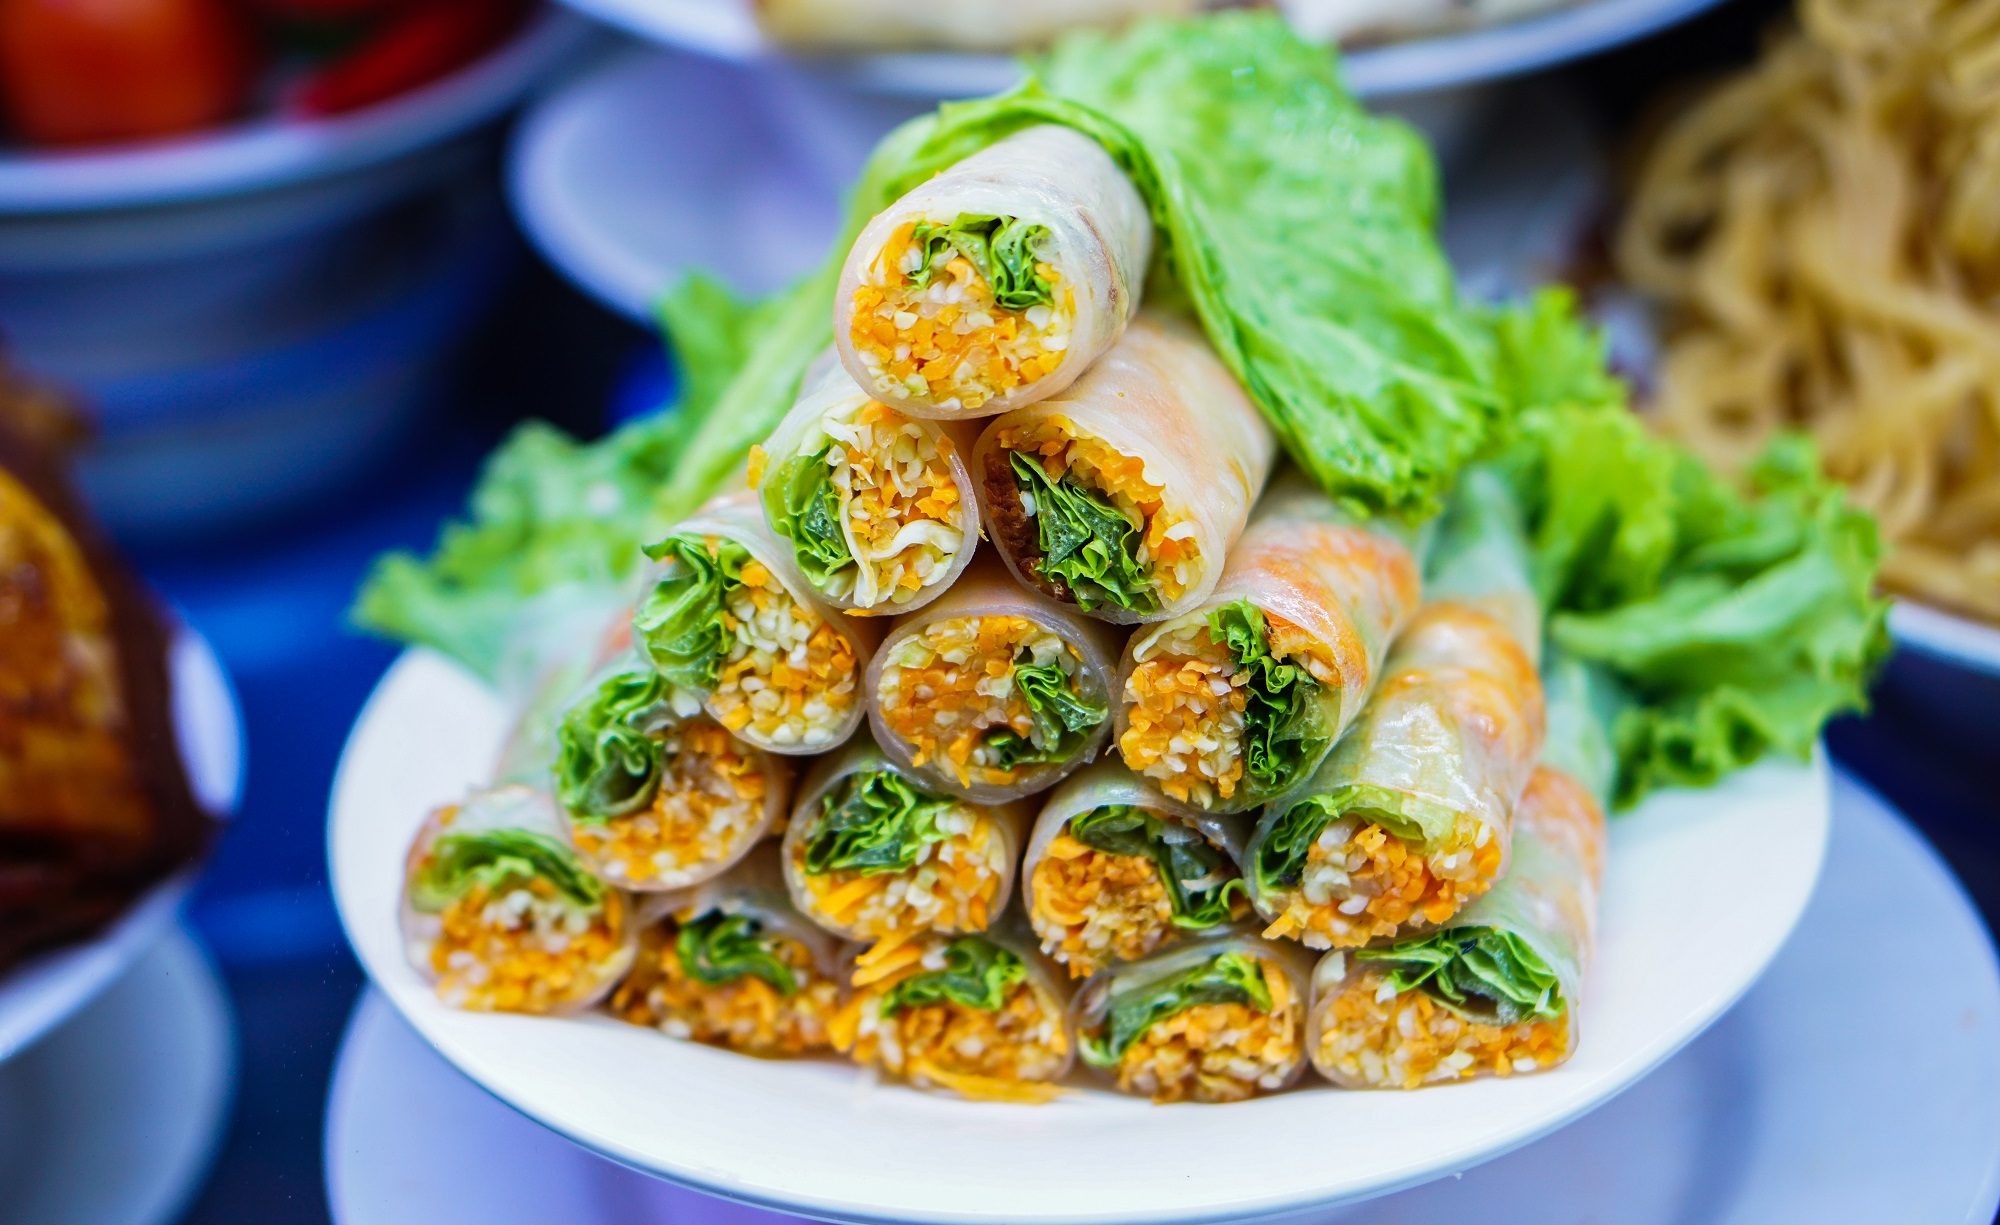 Taste The Flavor Of Vietnam During The Hoi An Food Tour